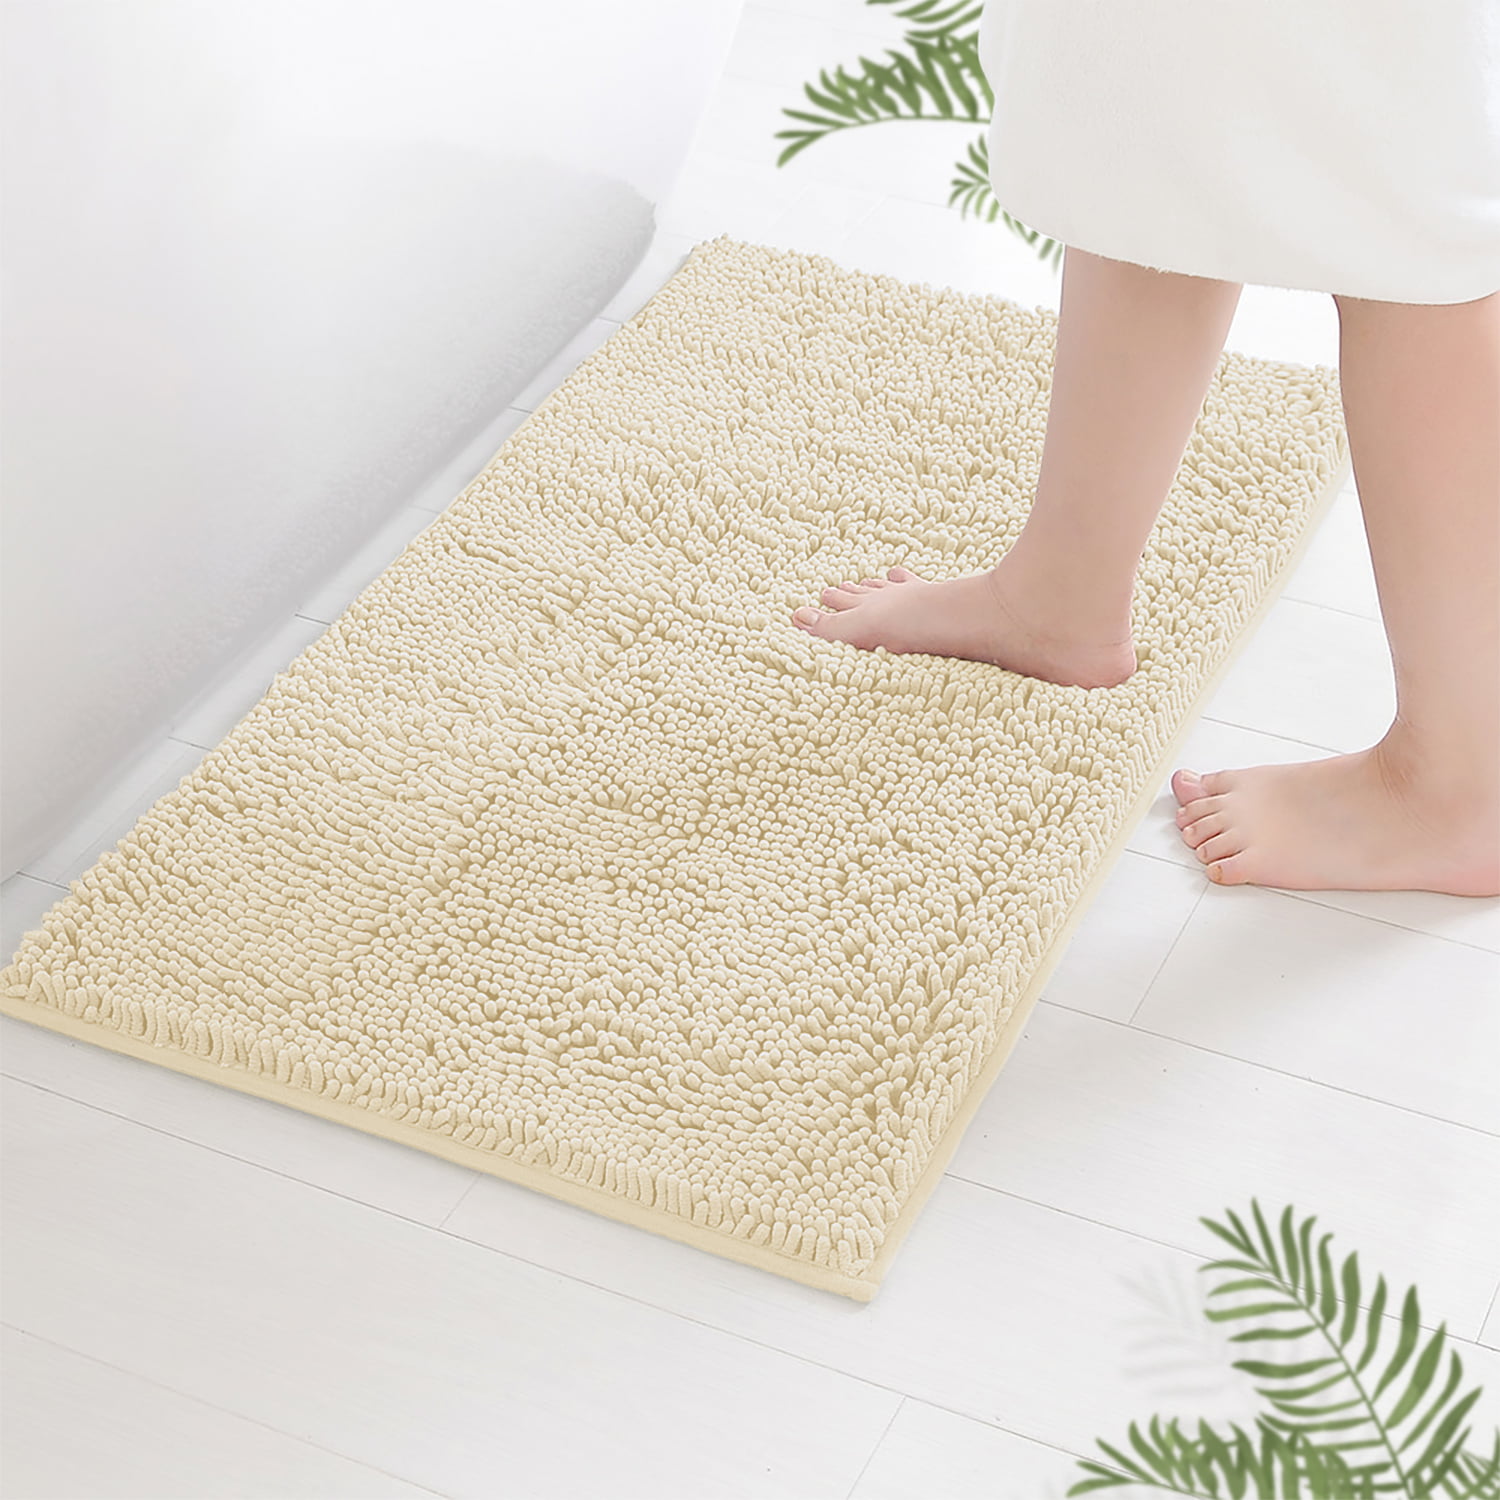 11,000 Shoppers Are Loving This Luxurious $14 Bath Rug